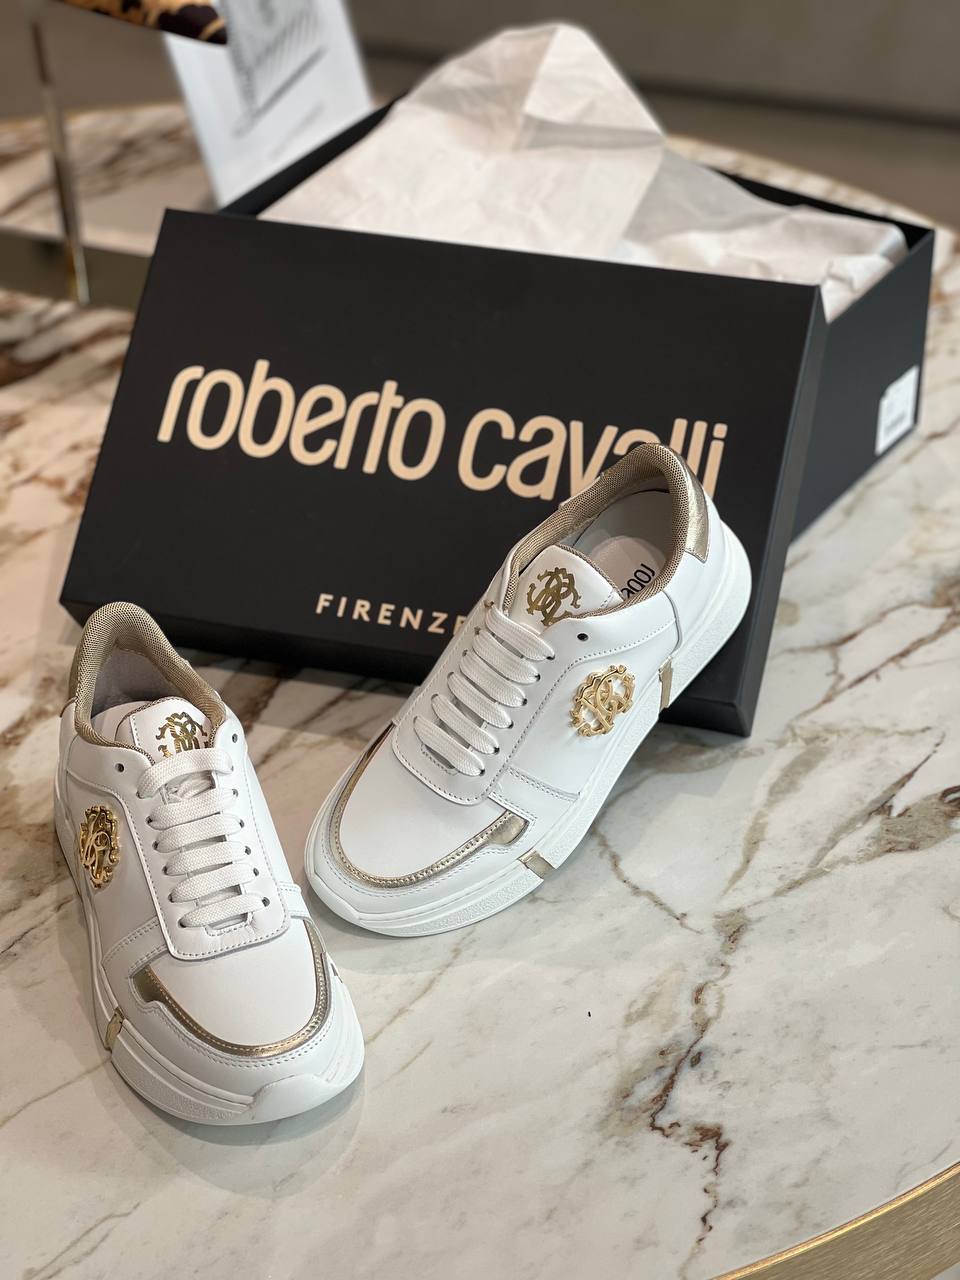 Roberto Cavalli Outlets 5869